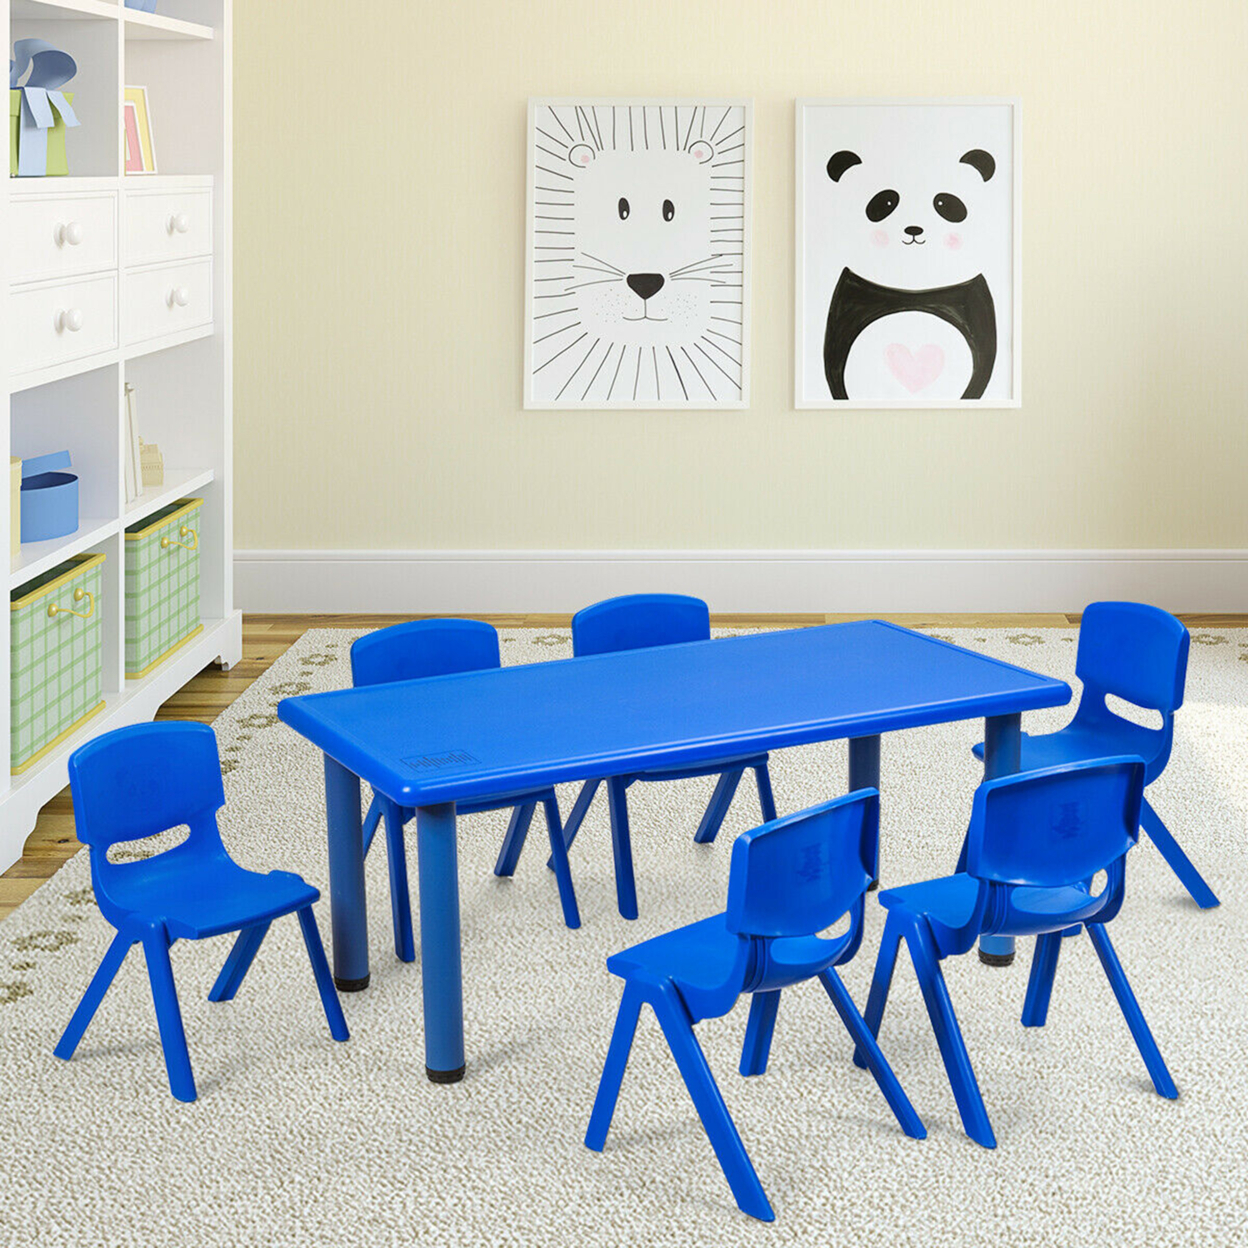 Kids Plastic Table And Stackable Chairs Set Indoor/Outdoor Classroom Home Blue